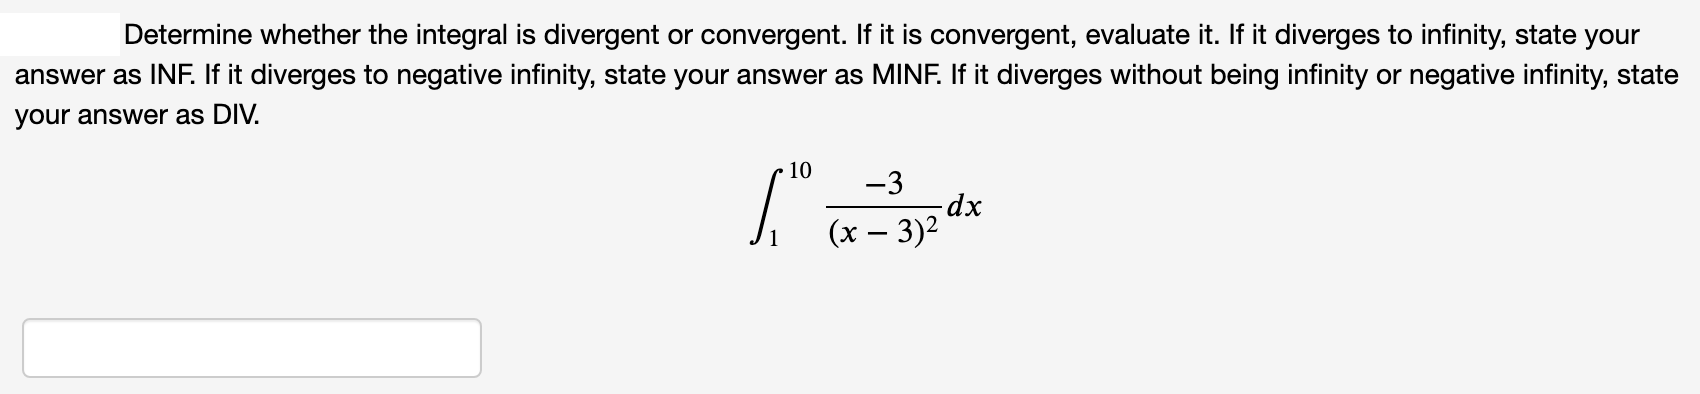 Determine whether the integral is divergent or convergent. If it is convergent, evaluate it. If it diverges to infinity, state your
answer as INF. If it diverges to negative infinity, state your answer as MINF. If it diverges without being infinity or negative infinity, state
your answer as DIV.
10
-3
-dx
(х — 3)2
